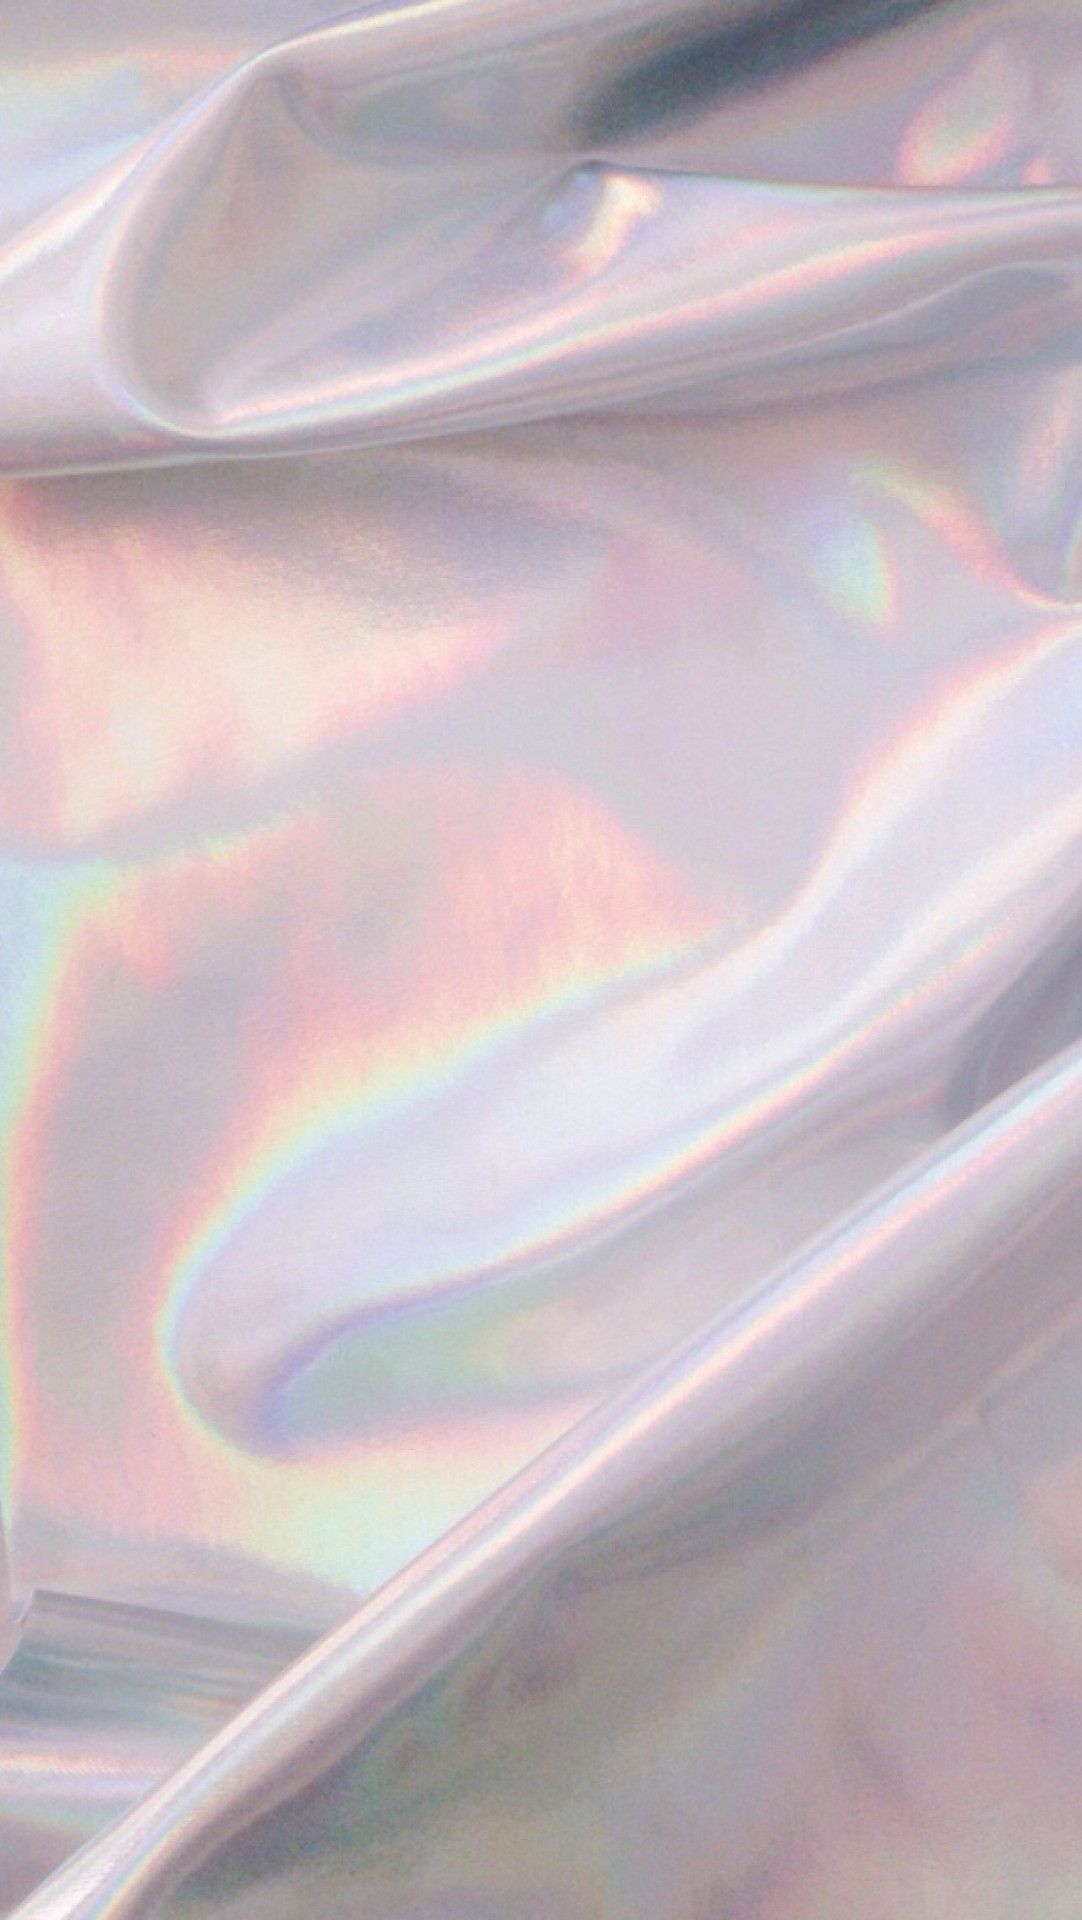 A close up of some fabric with rainbow colors - Rose gold